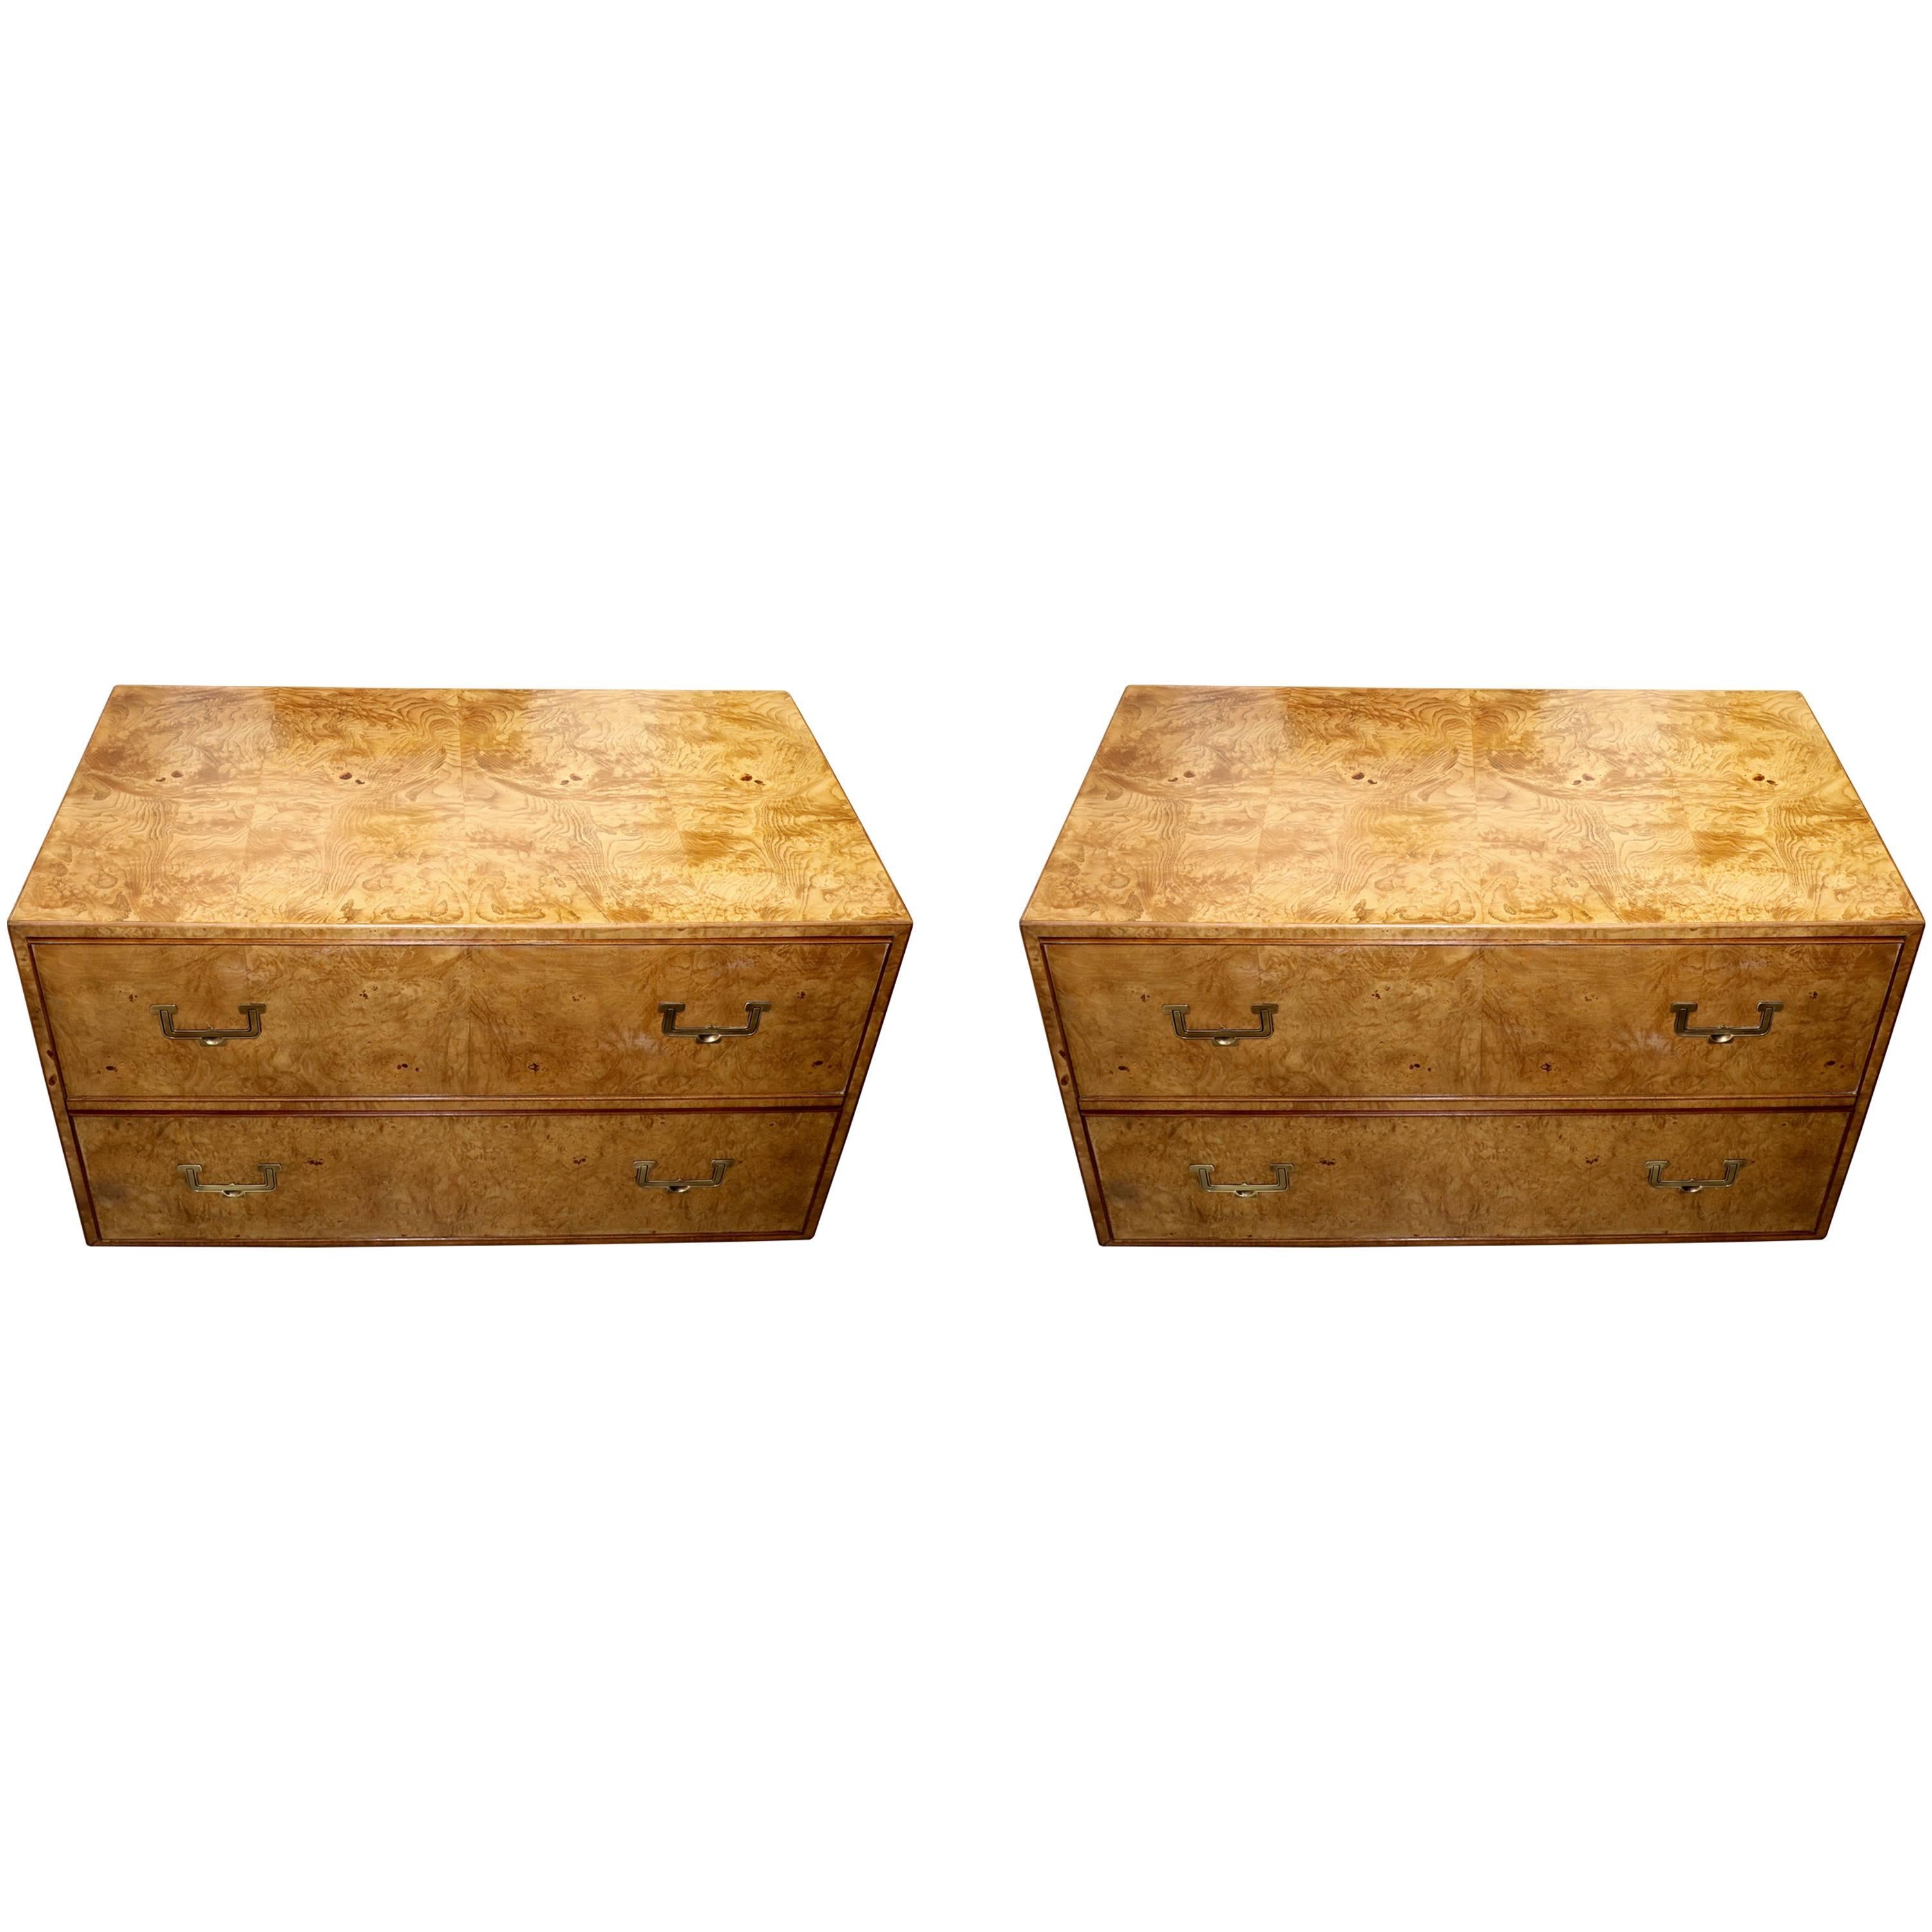 Pair of Widdicomb Campaign Styles Nightstand or End Tables in Burlwood